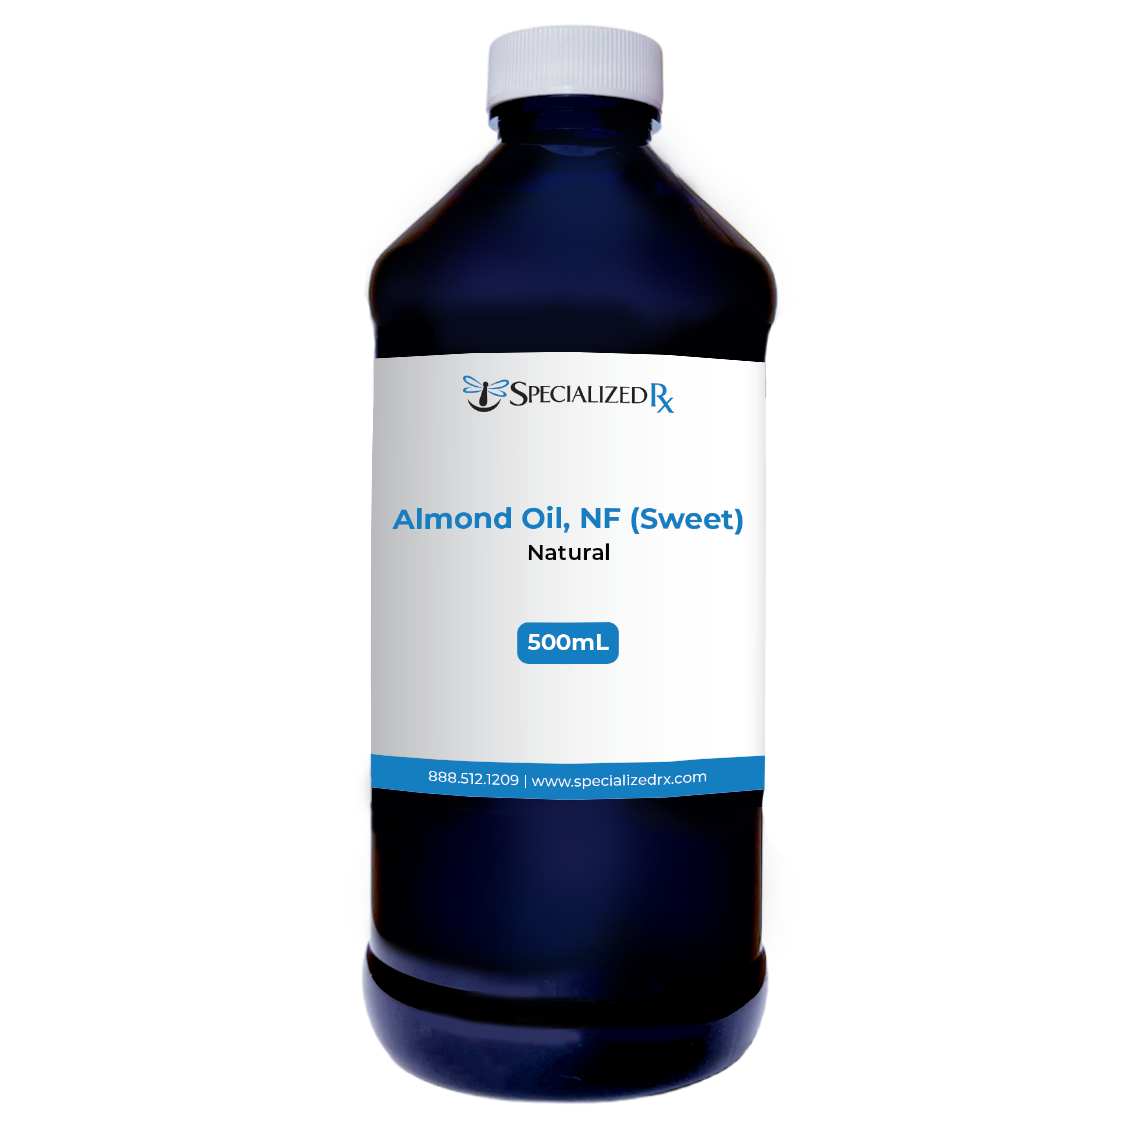 Almond Oil, NF (Sweet) (Natural)